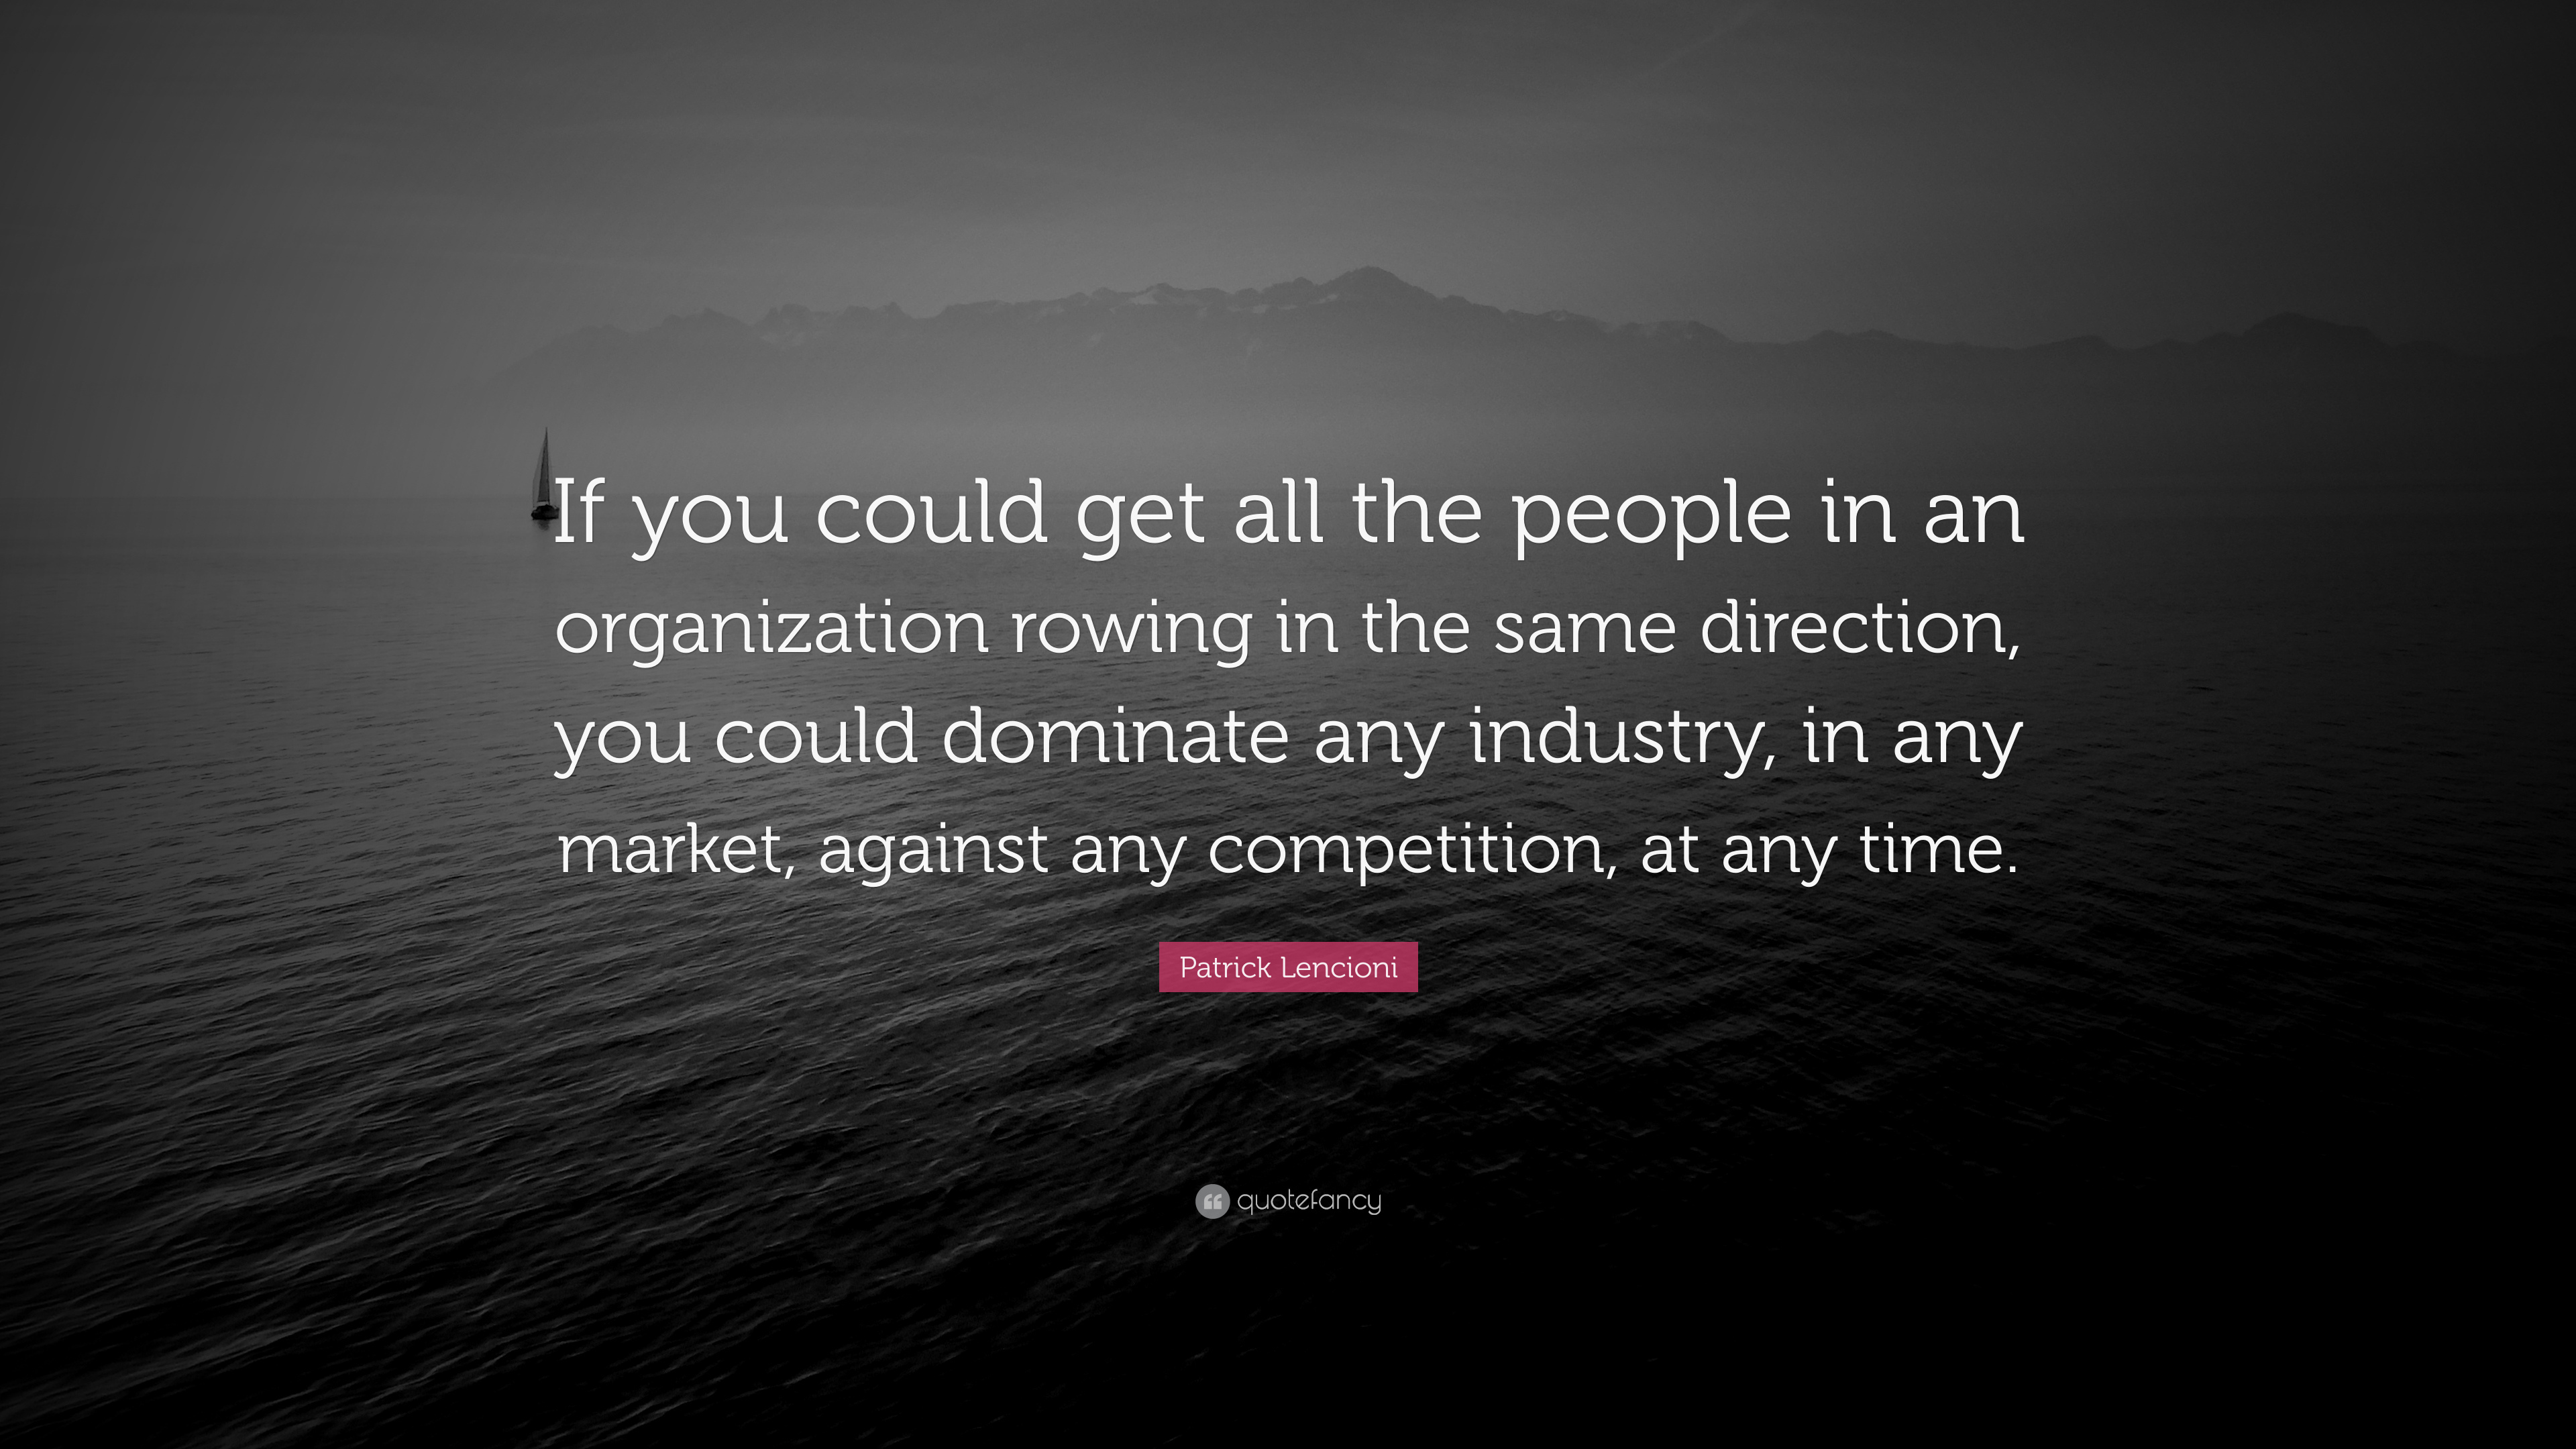 Patrick Lencioni Quote: “If you could get all the people in an